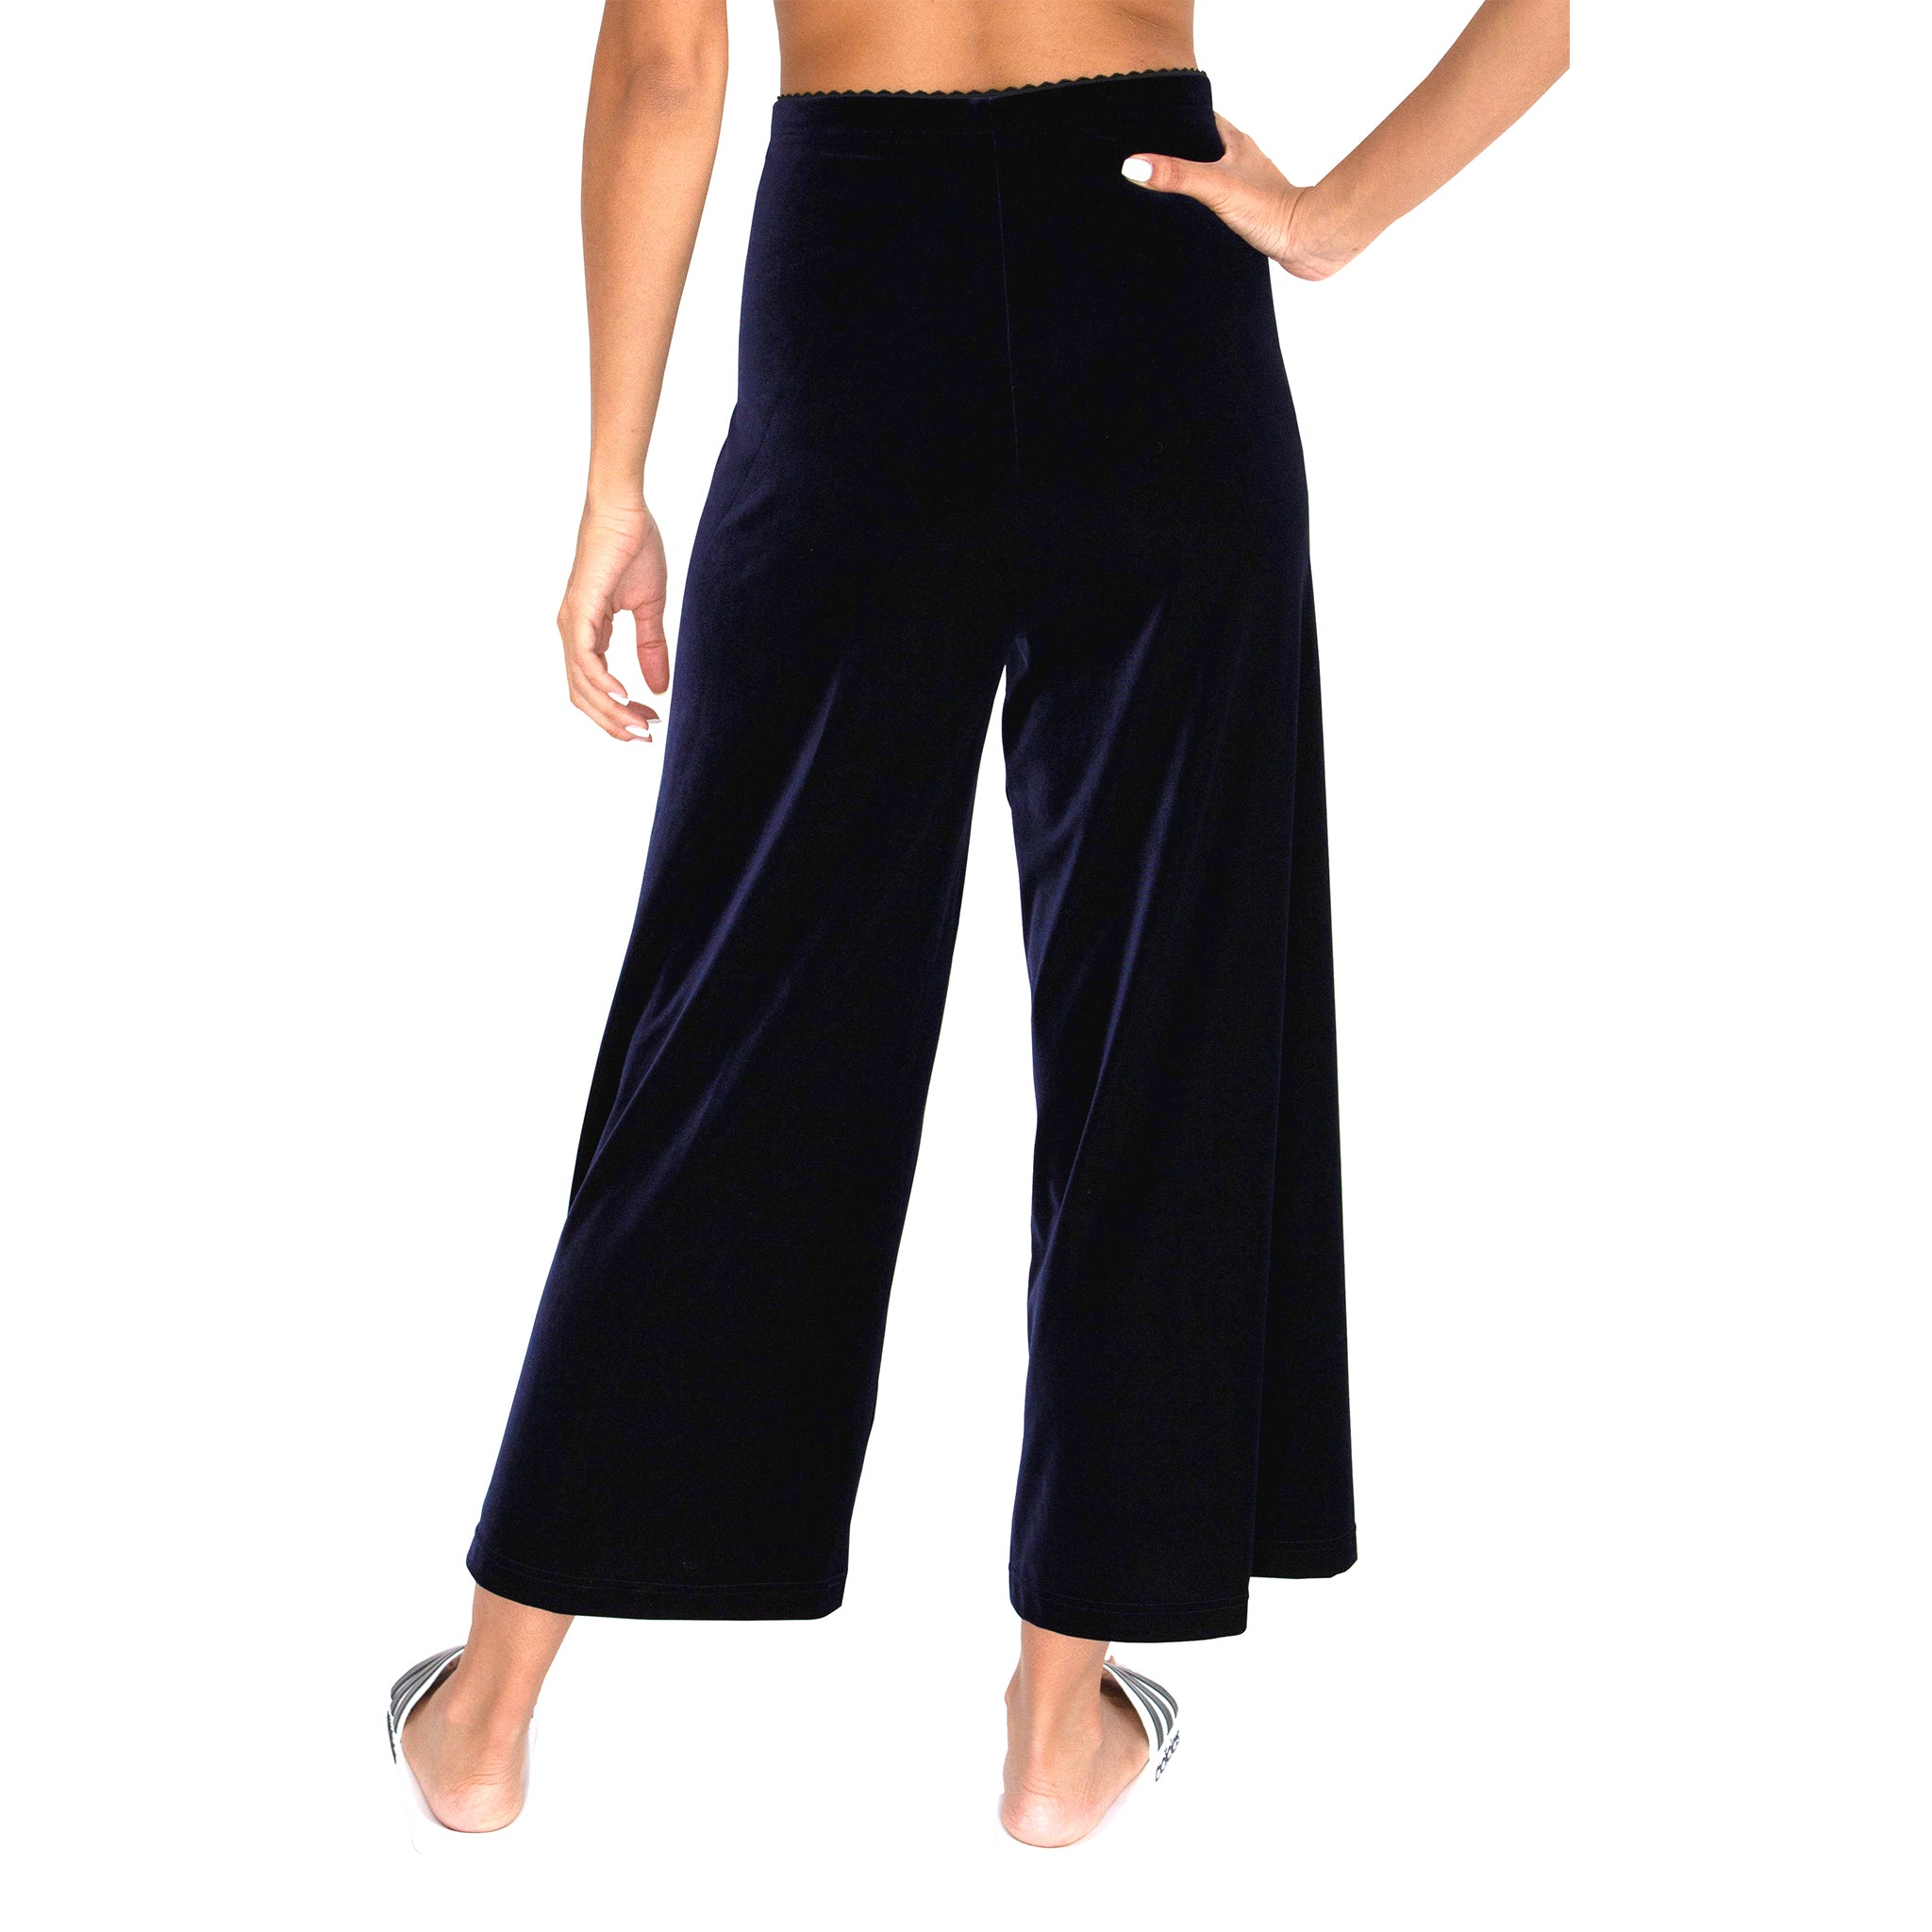 Back view of our Cropped Length Stretch Velvet Pant in Sapphire (Dark Blue) has elastic waist and 26" inseam.